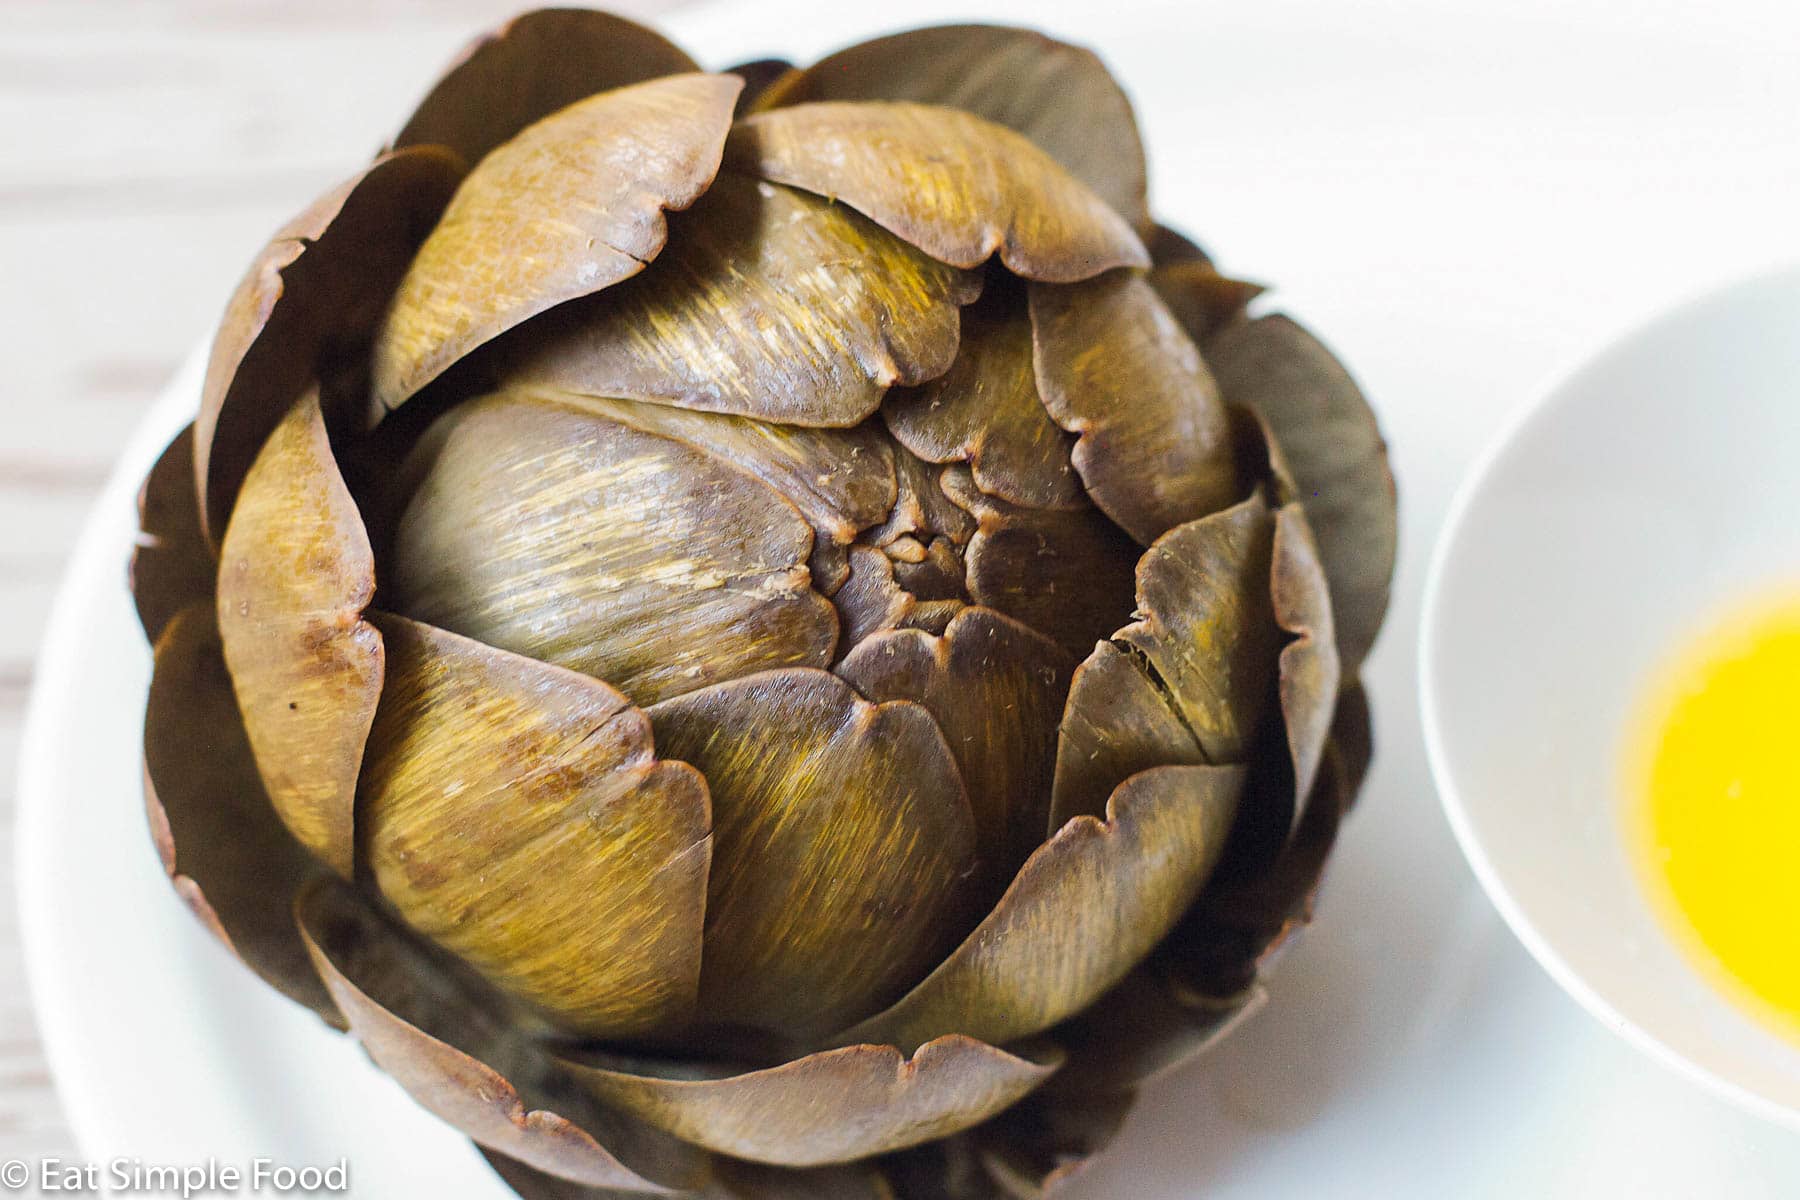 Whole Steamed Dark Green Artichoke Close Up on a White Plate. Top view.